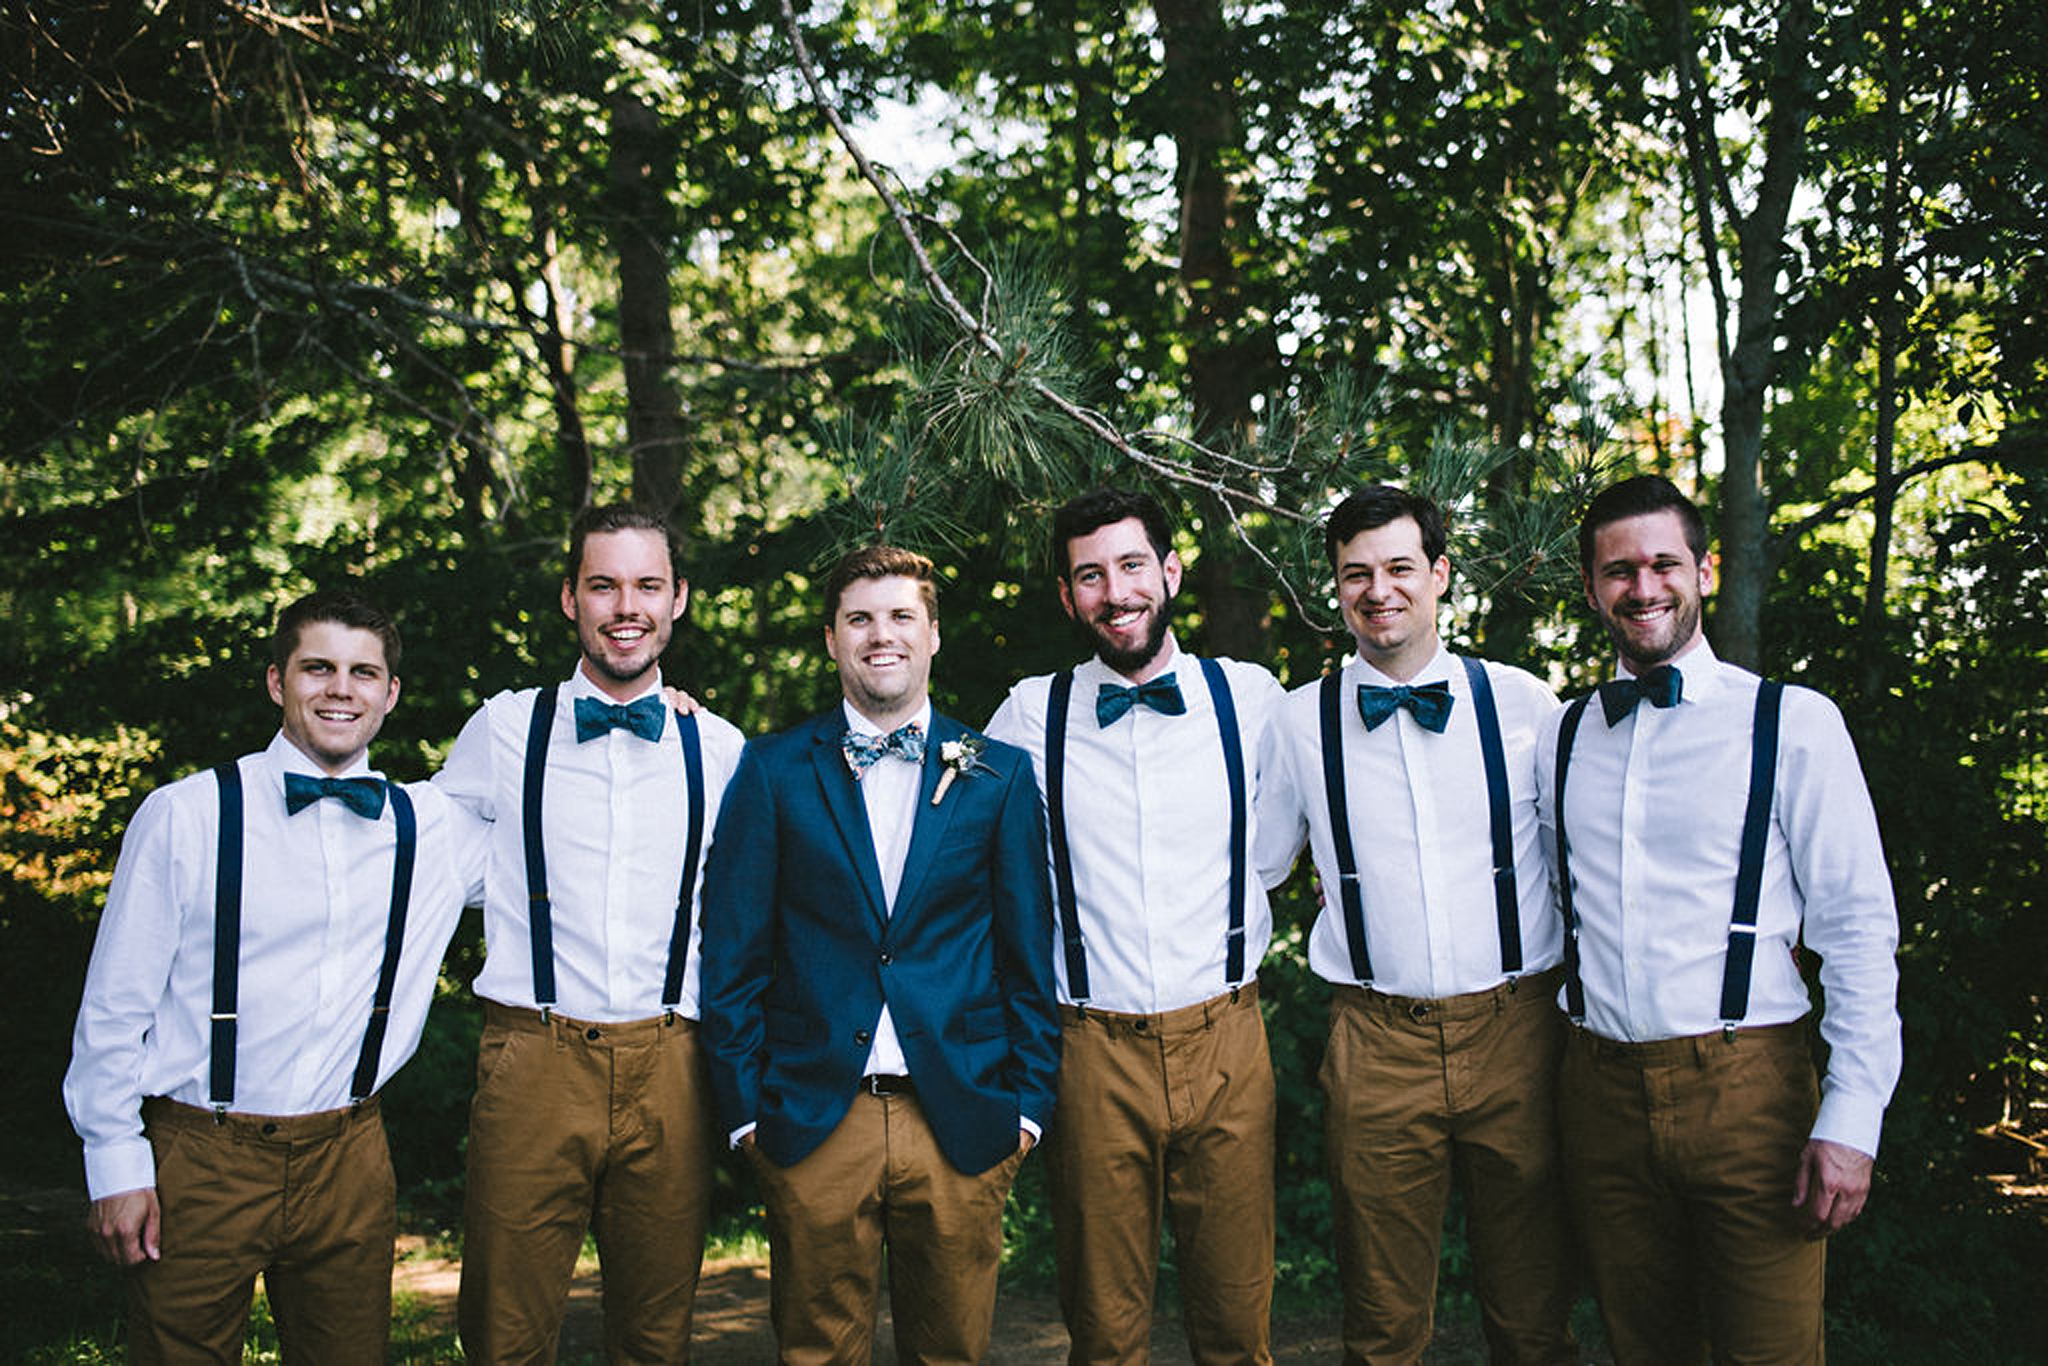 Groomsmen style in bowties and suspenders at Parry Sound camp we